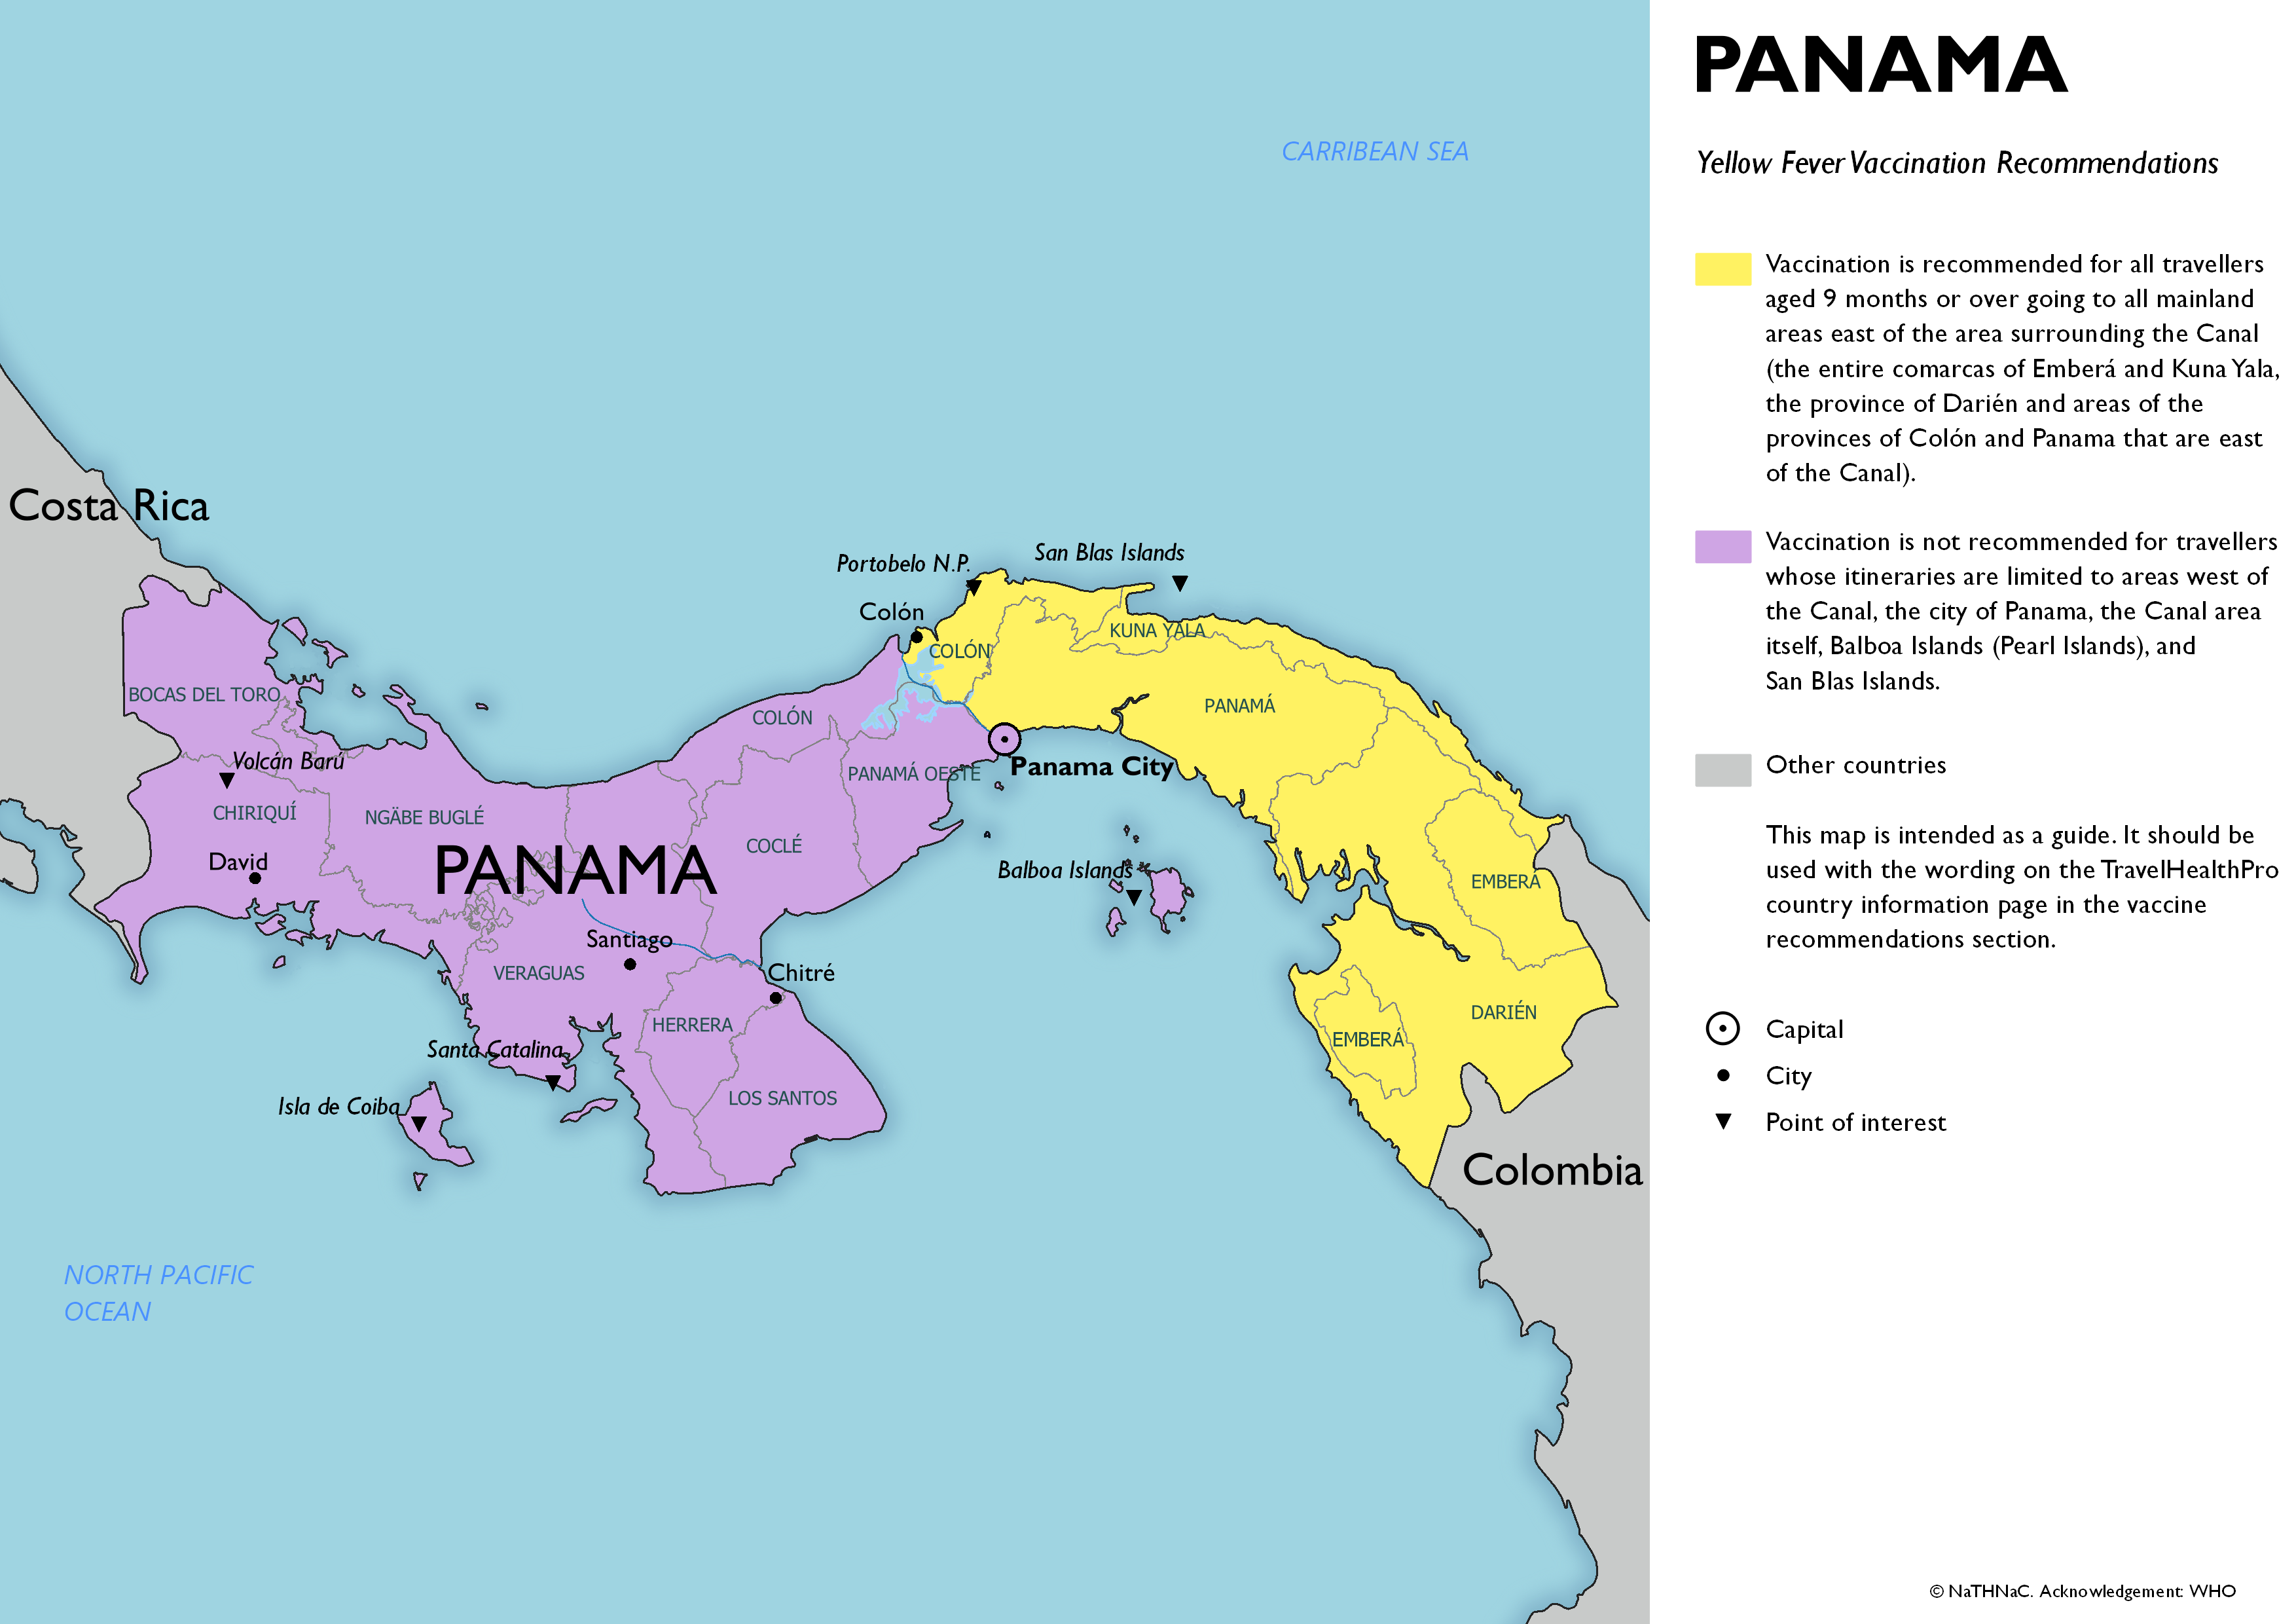 Yellow fever vaccine recommendation map for Panama